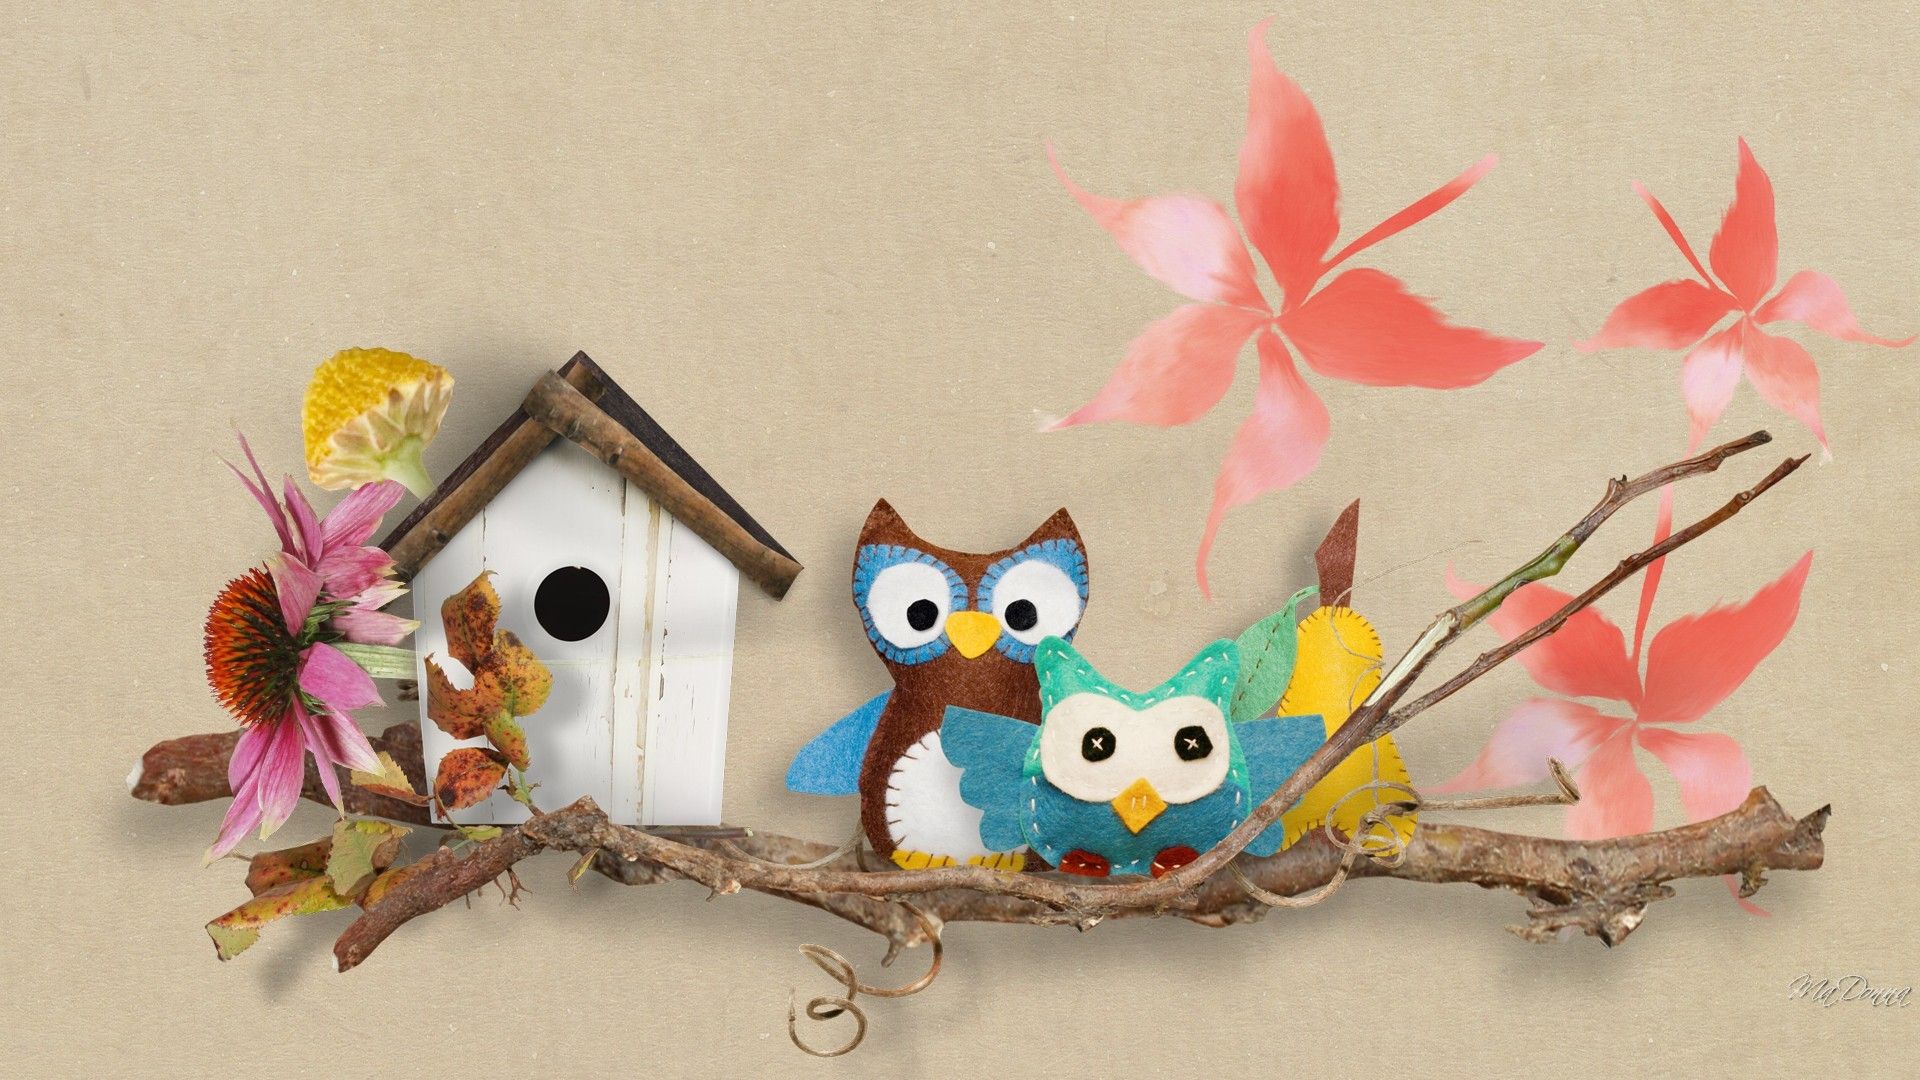 SuperHD.pics: Owls for autumn birds twigs fall leaves whimsical